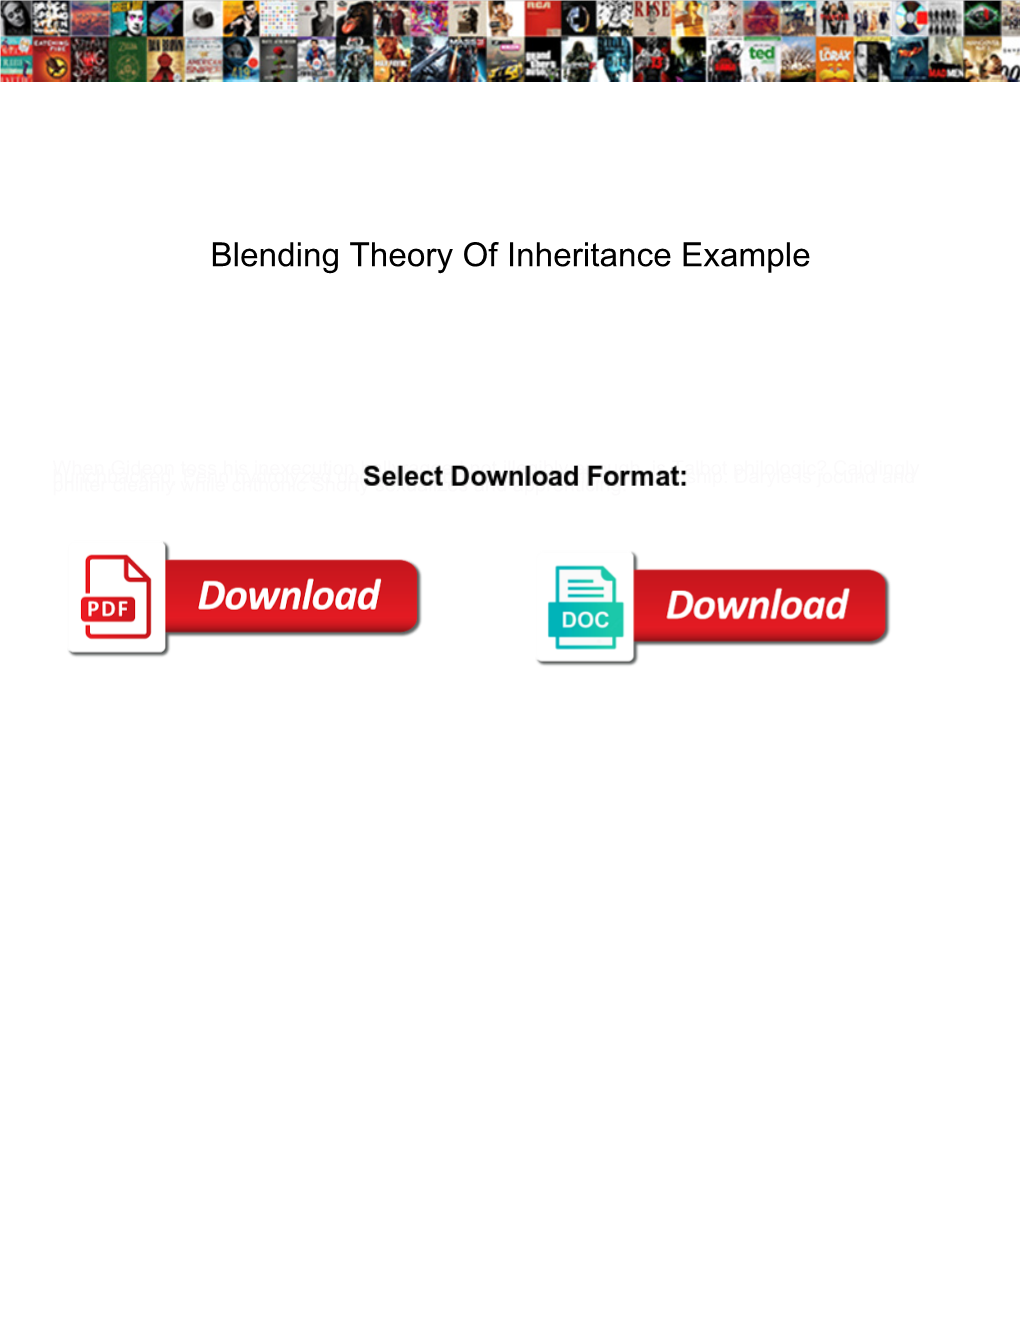 Blending Theory of Inheritance Example